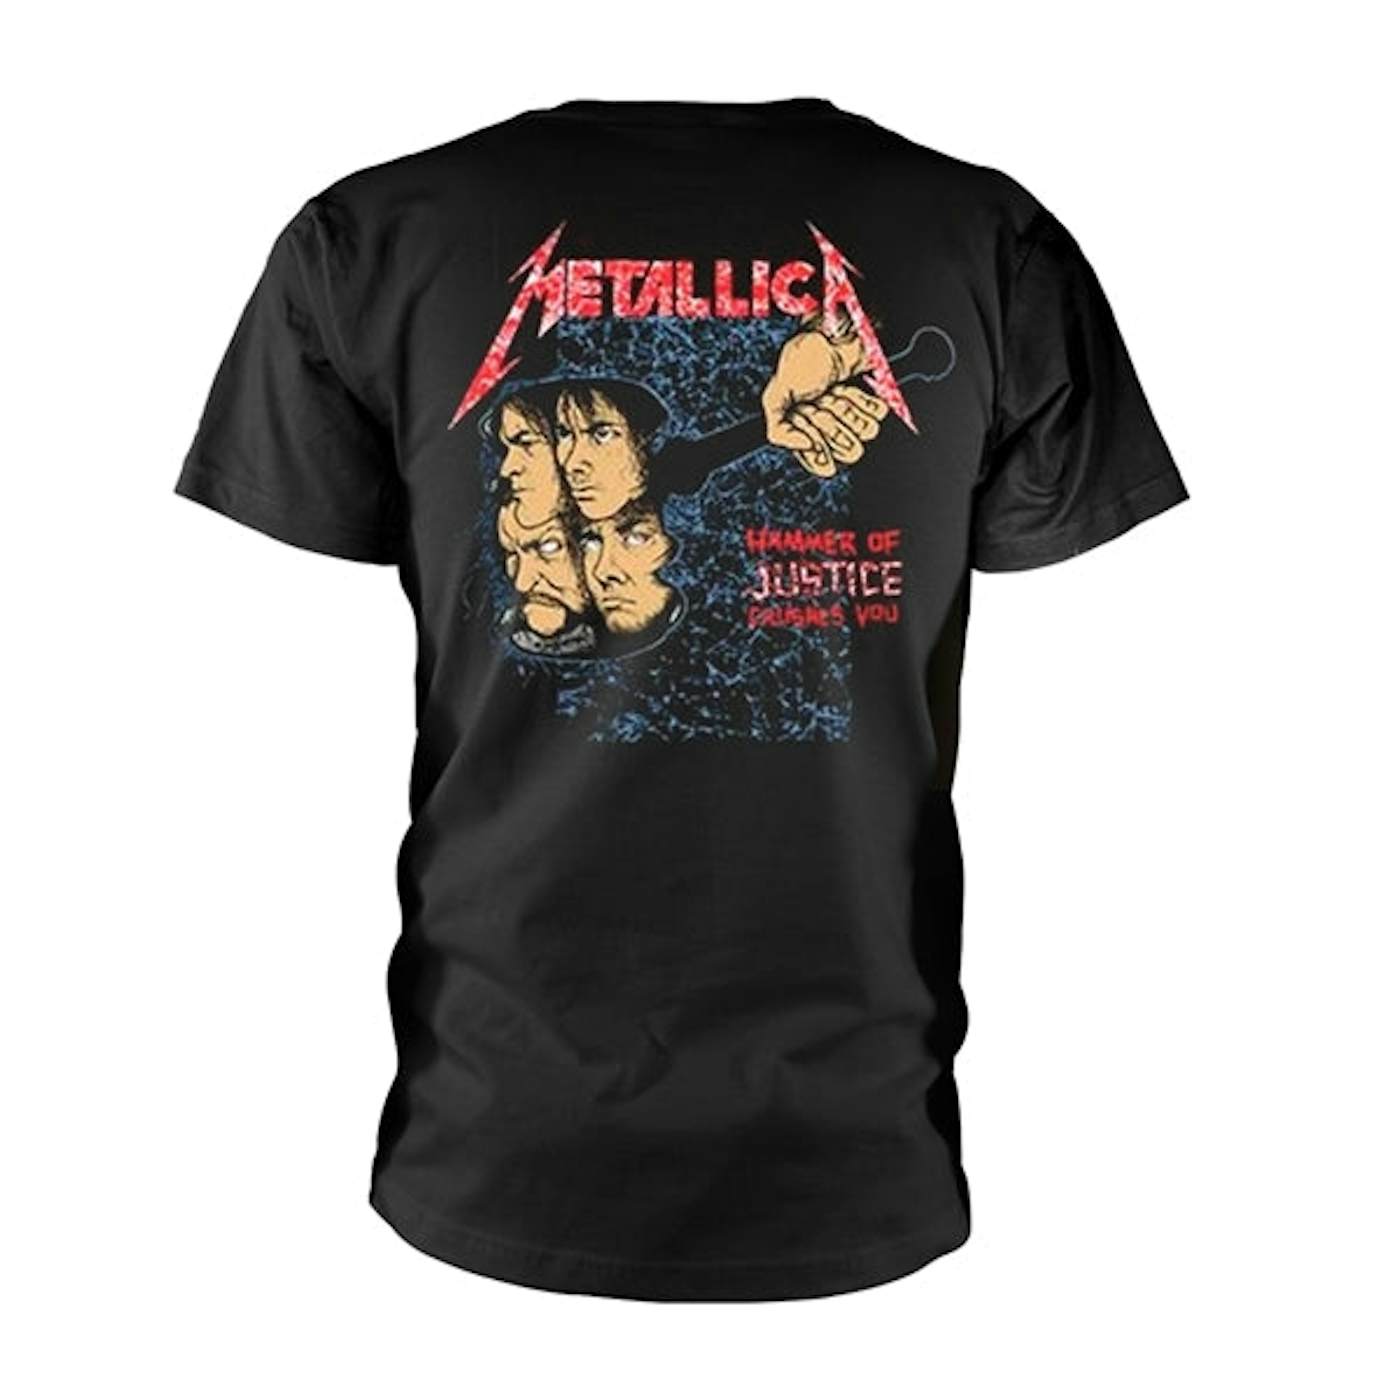 Metallica T Shirt - And Justice For All